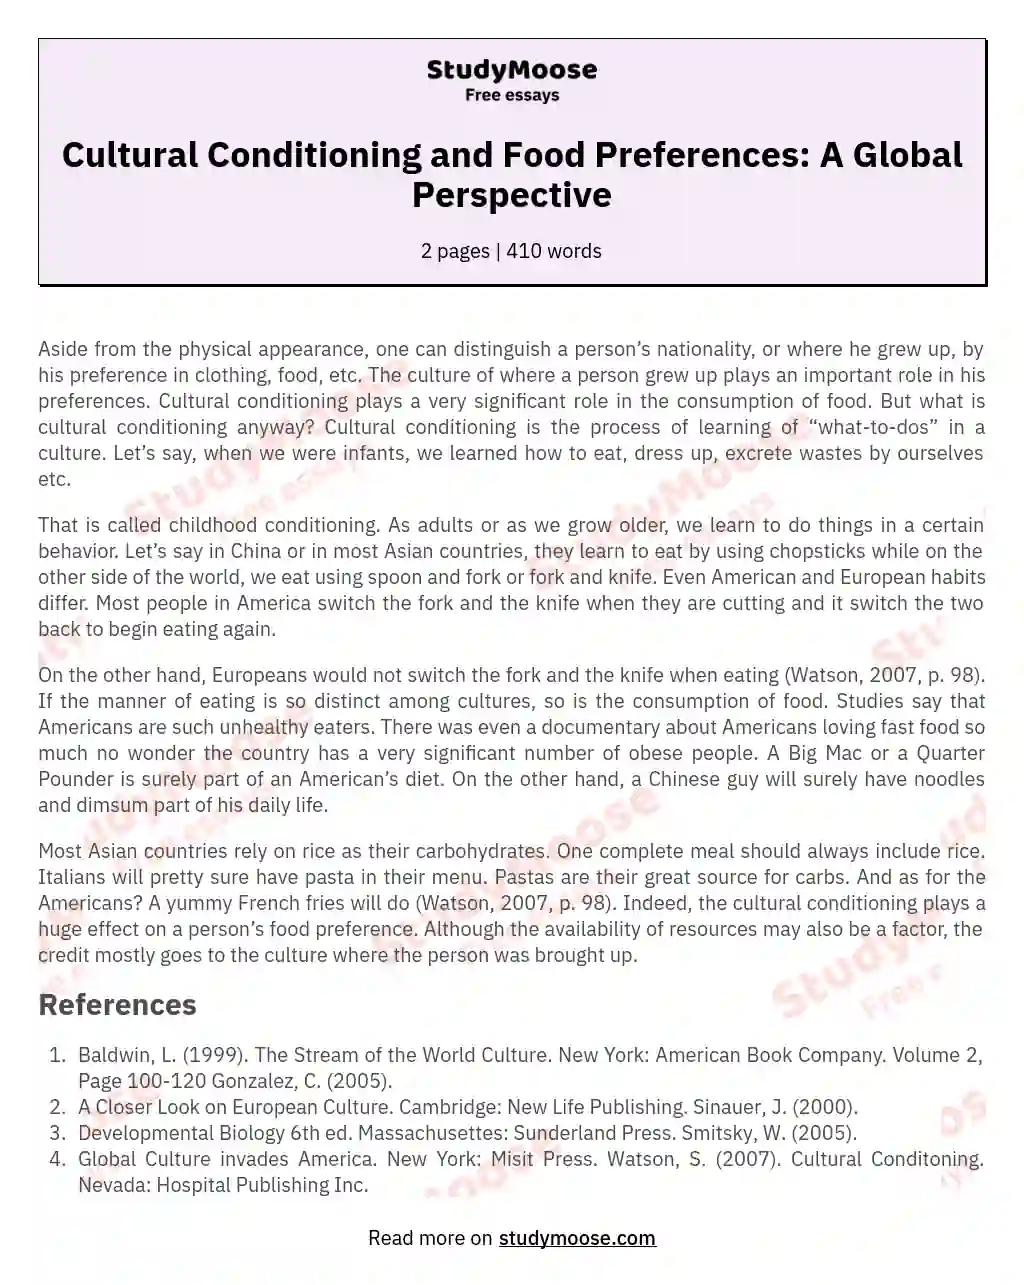 Cultural Conditioning and Food Preferences: A Global Perspective essay